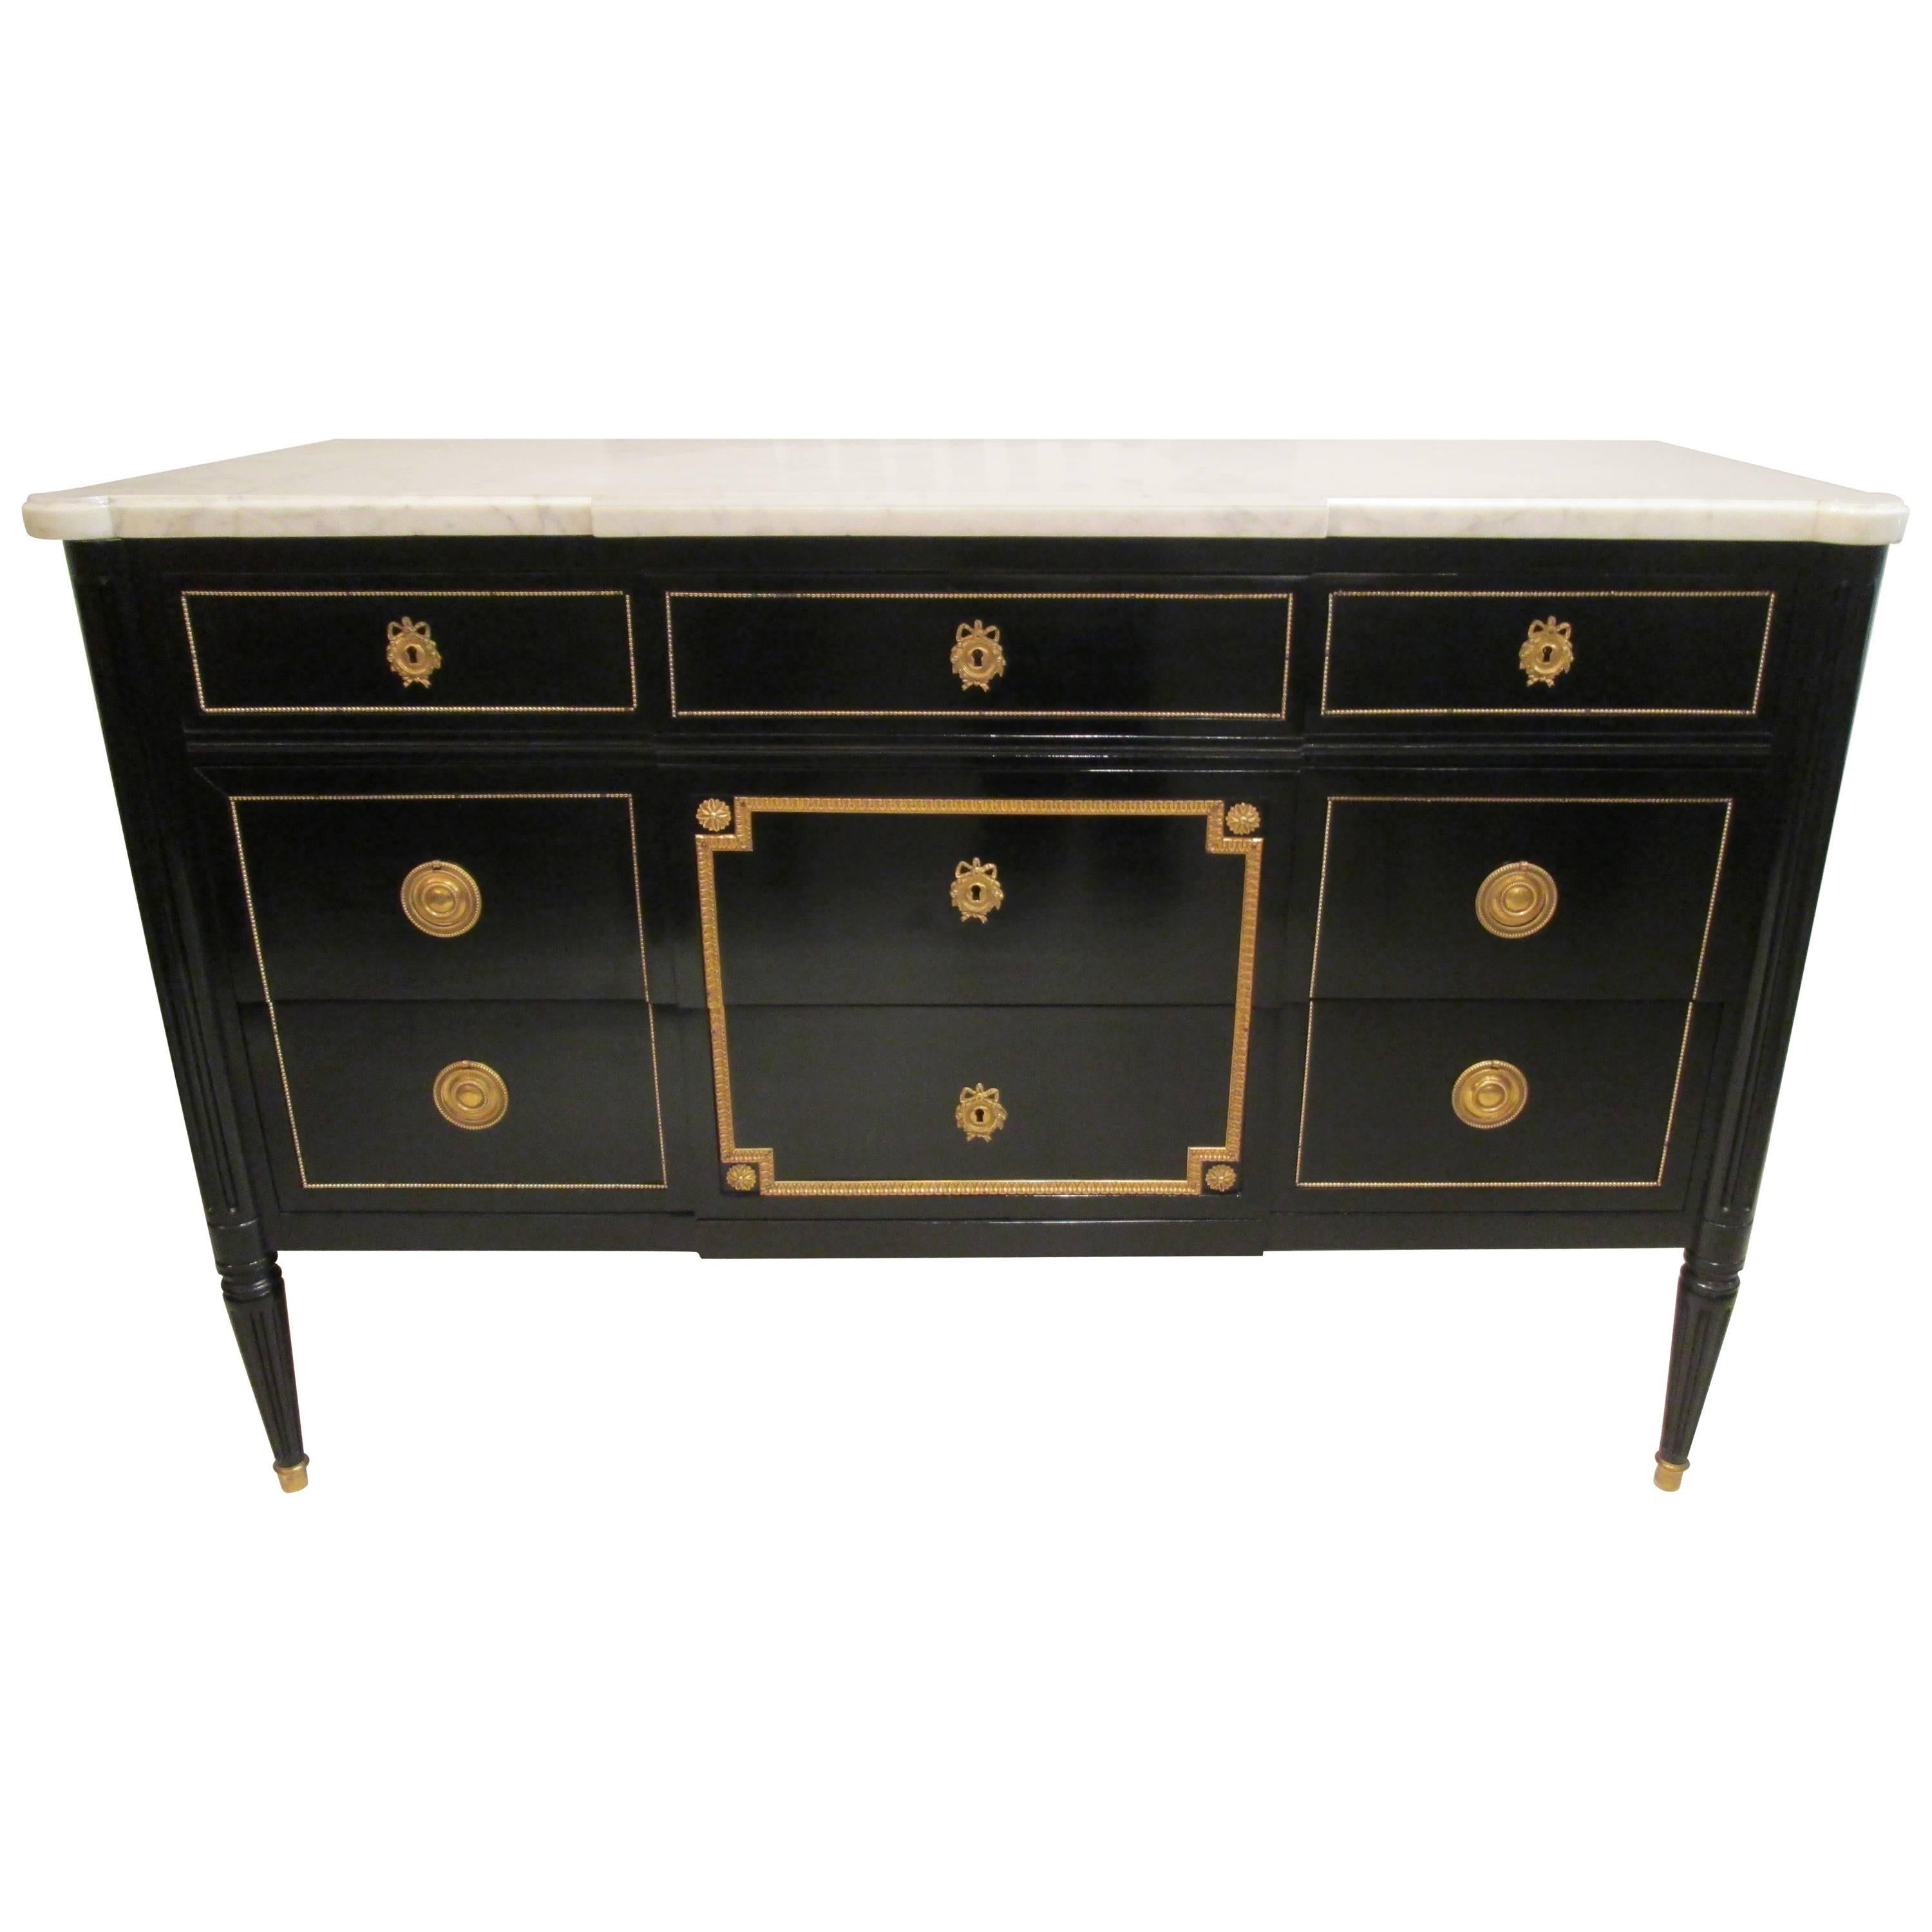 Maison Jansen  bronze- mounted, ebonized commode with marble top with five pull-out drawers,
circa 1940s, 1950's